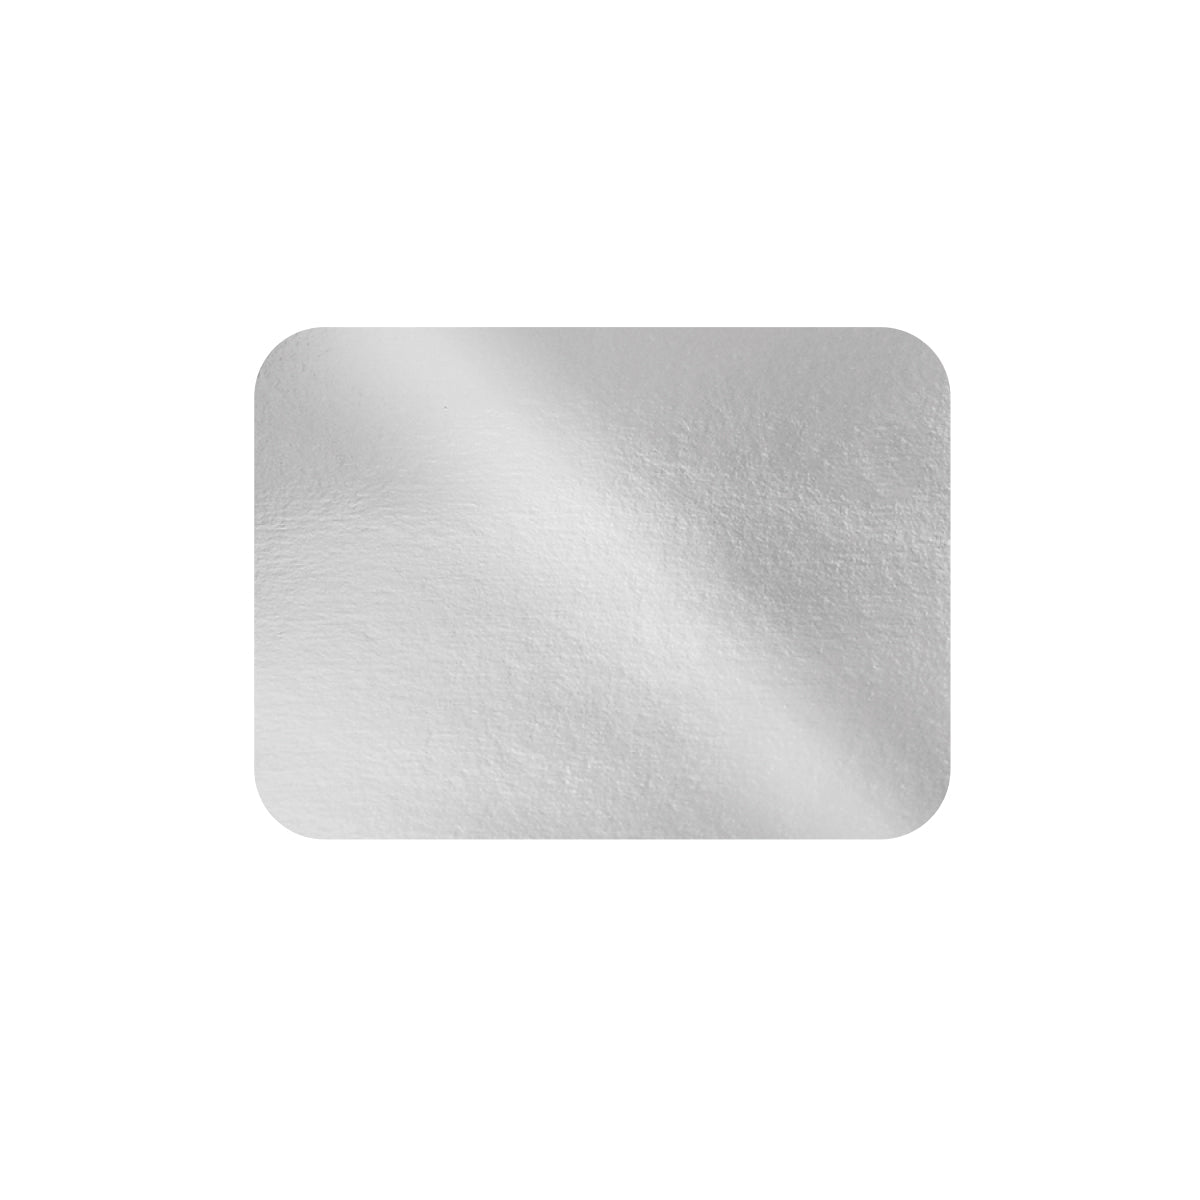 Lid for 1 LB Oblong Take Out Pan | Paper Board (Case of 1000)